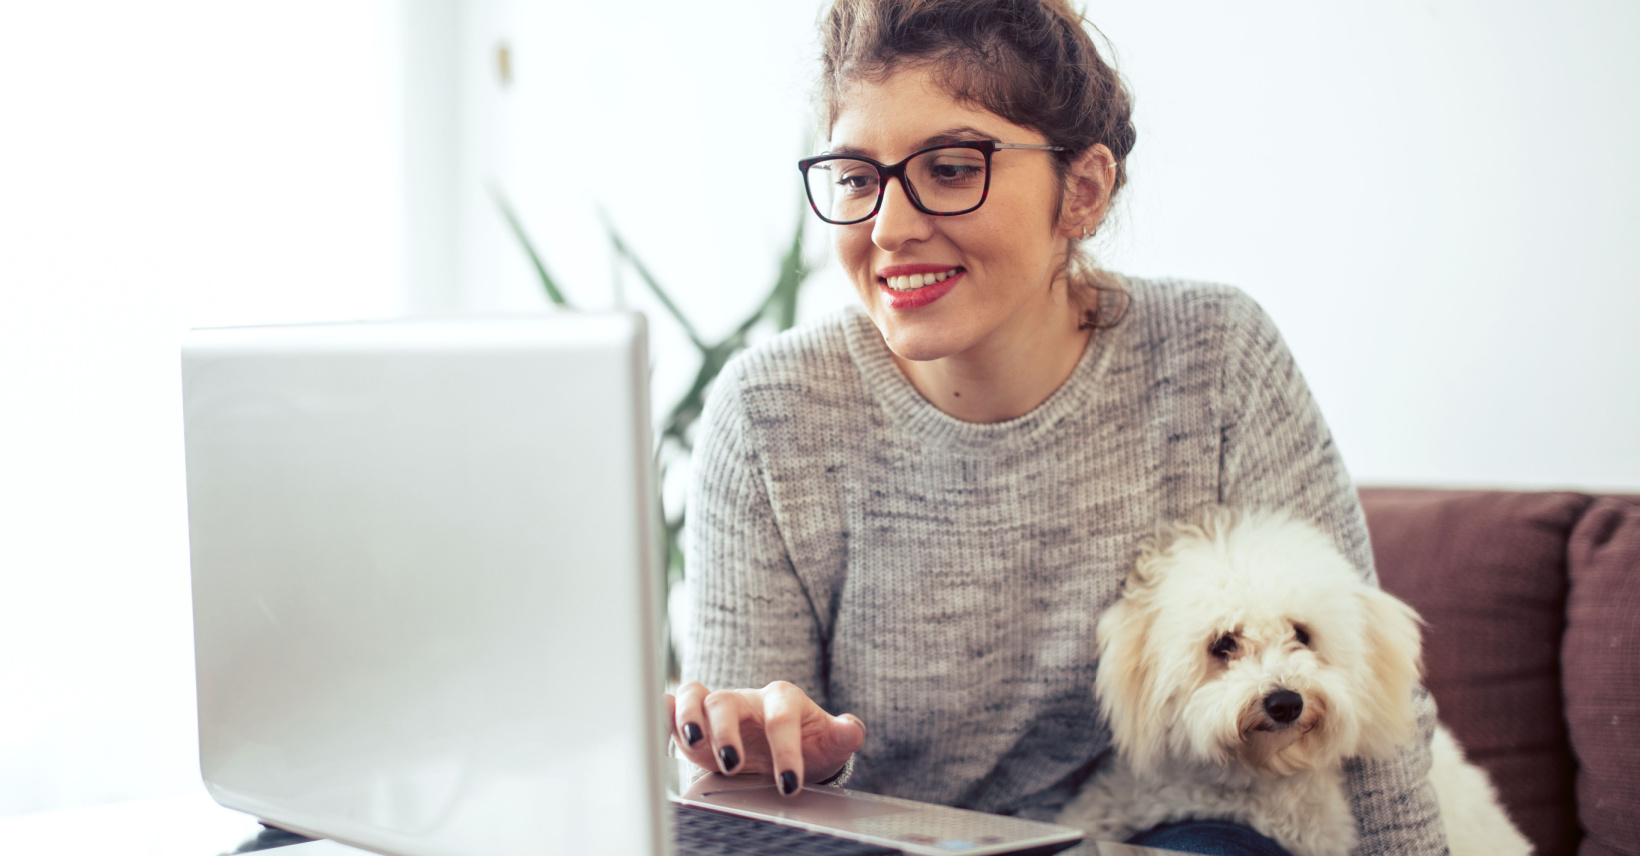 The Best Legitimate Work-From-Home Jobs